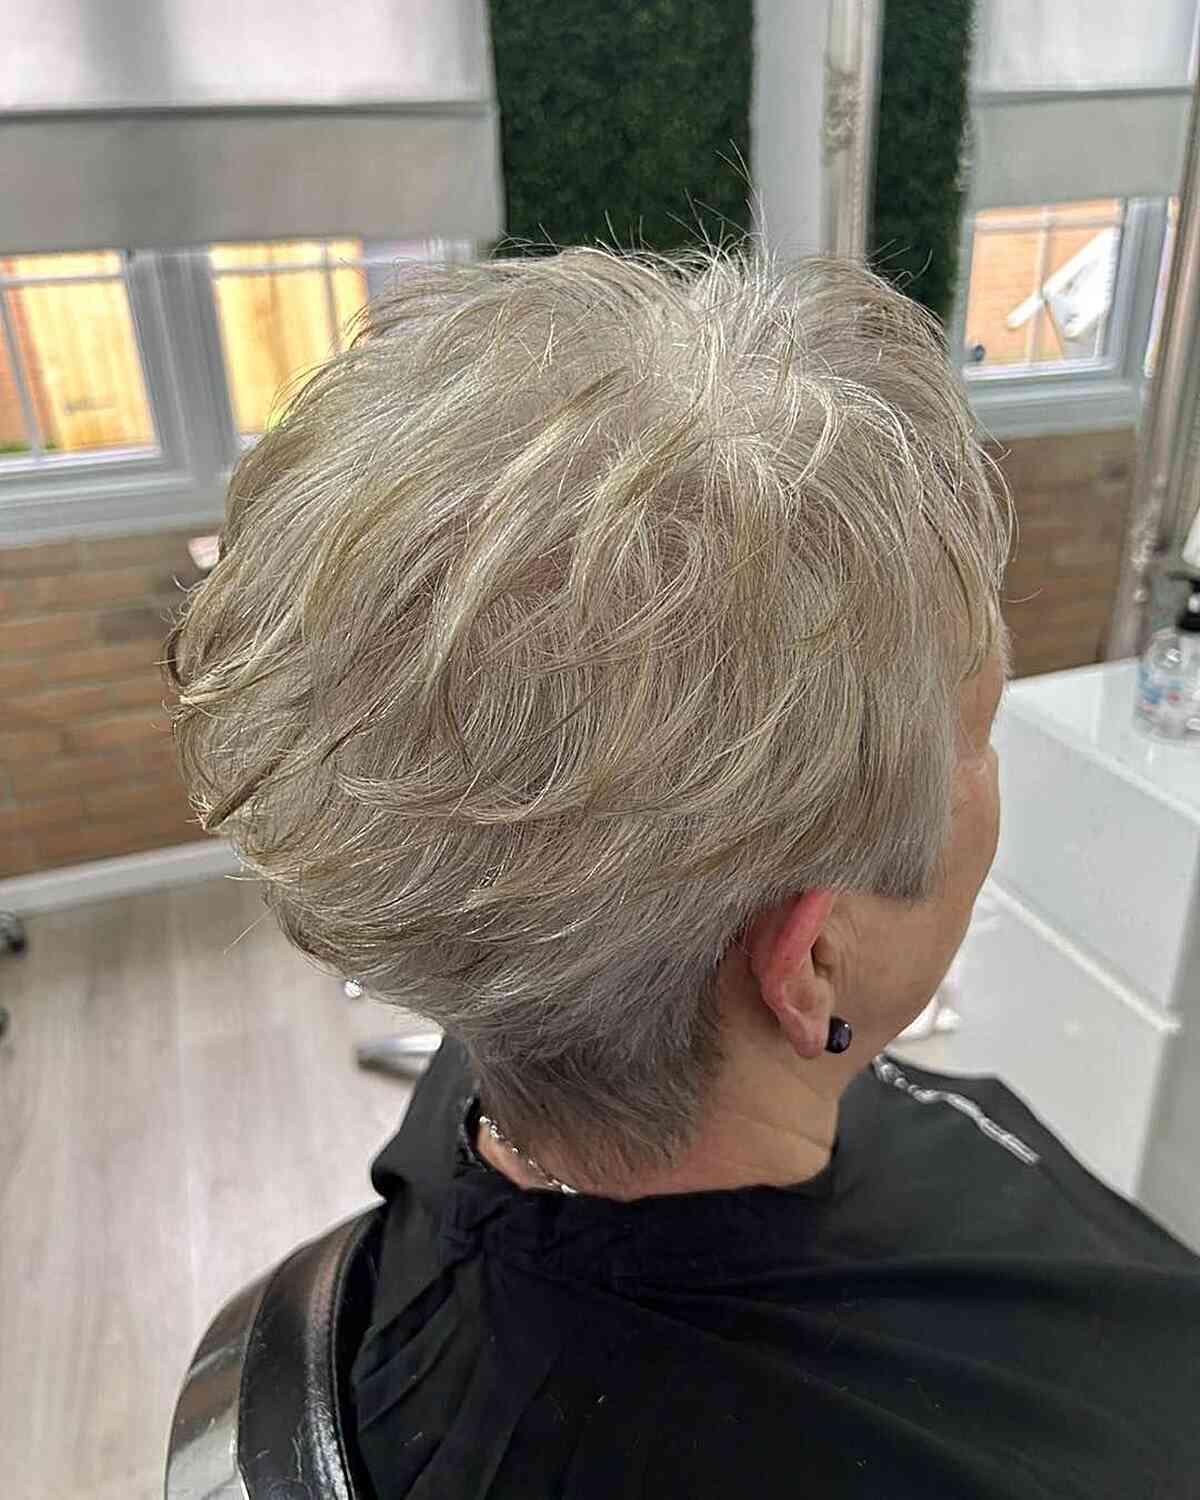 25 Incredible Short, Choppy Haircuts Women Over 60 Are Getting in 2023